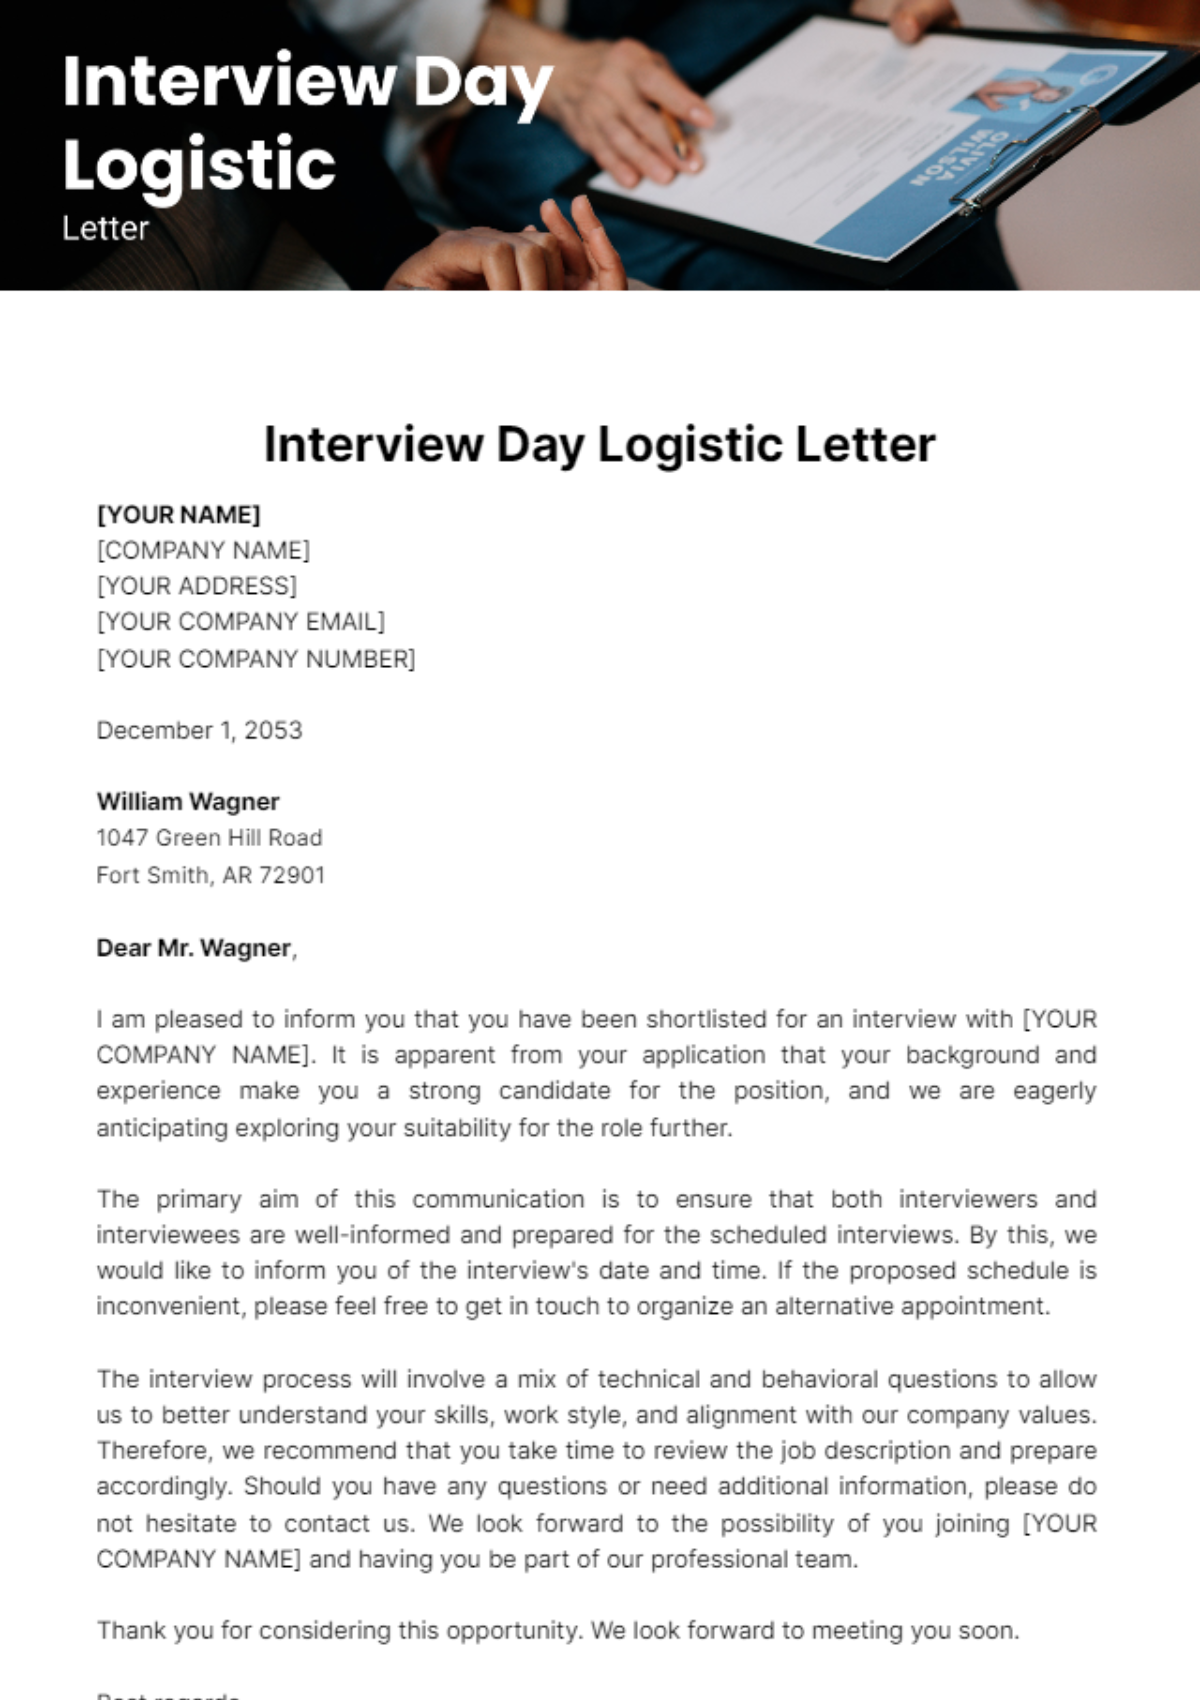 Free Interview Day Logistic Letter Template